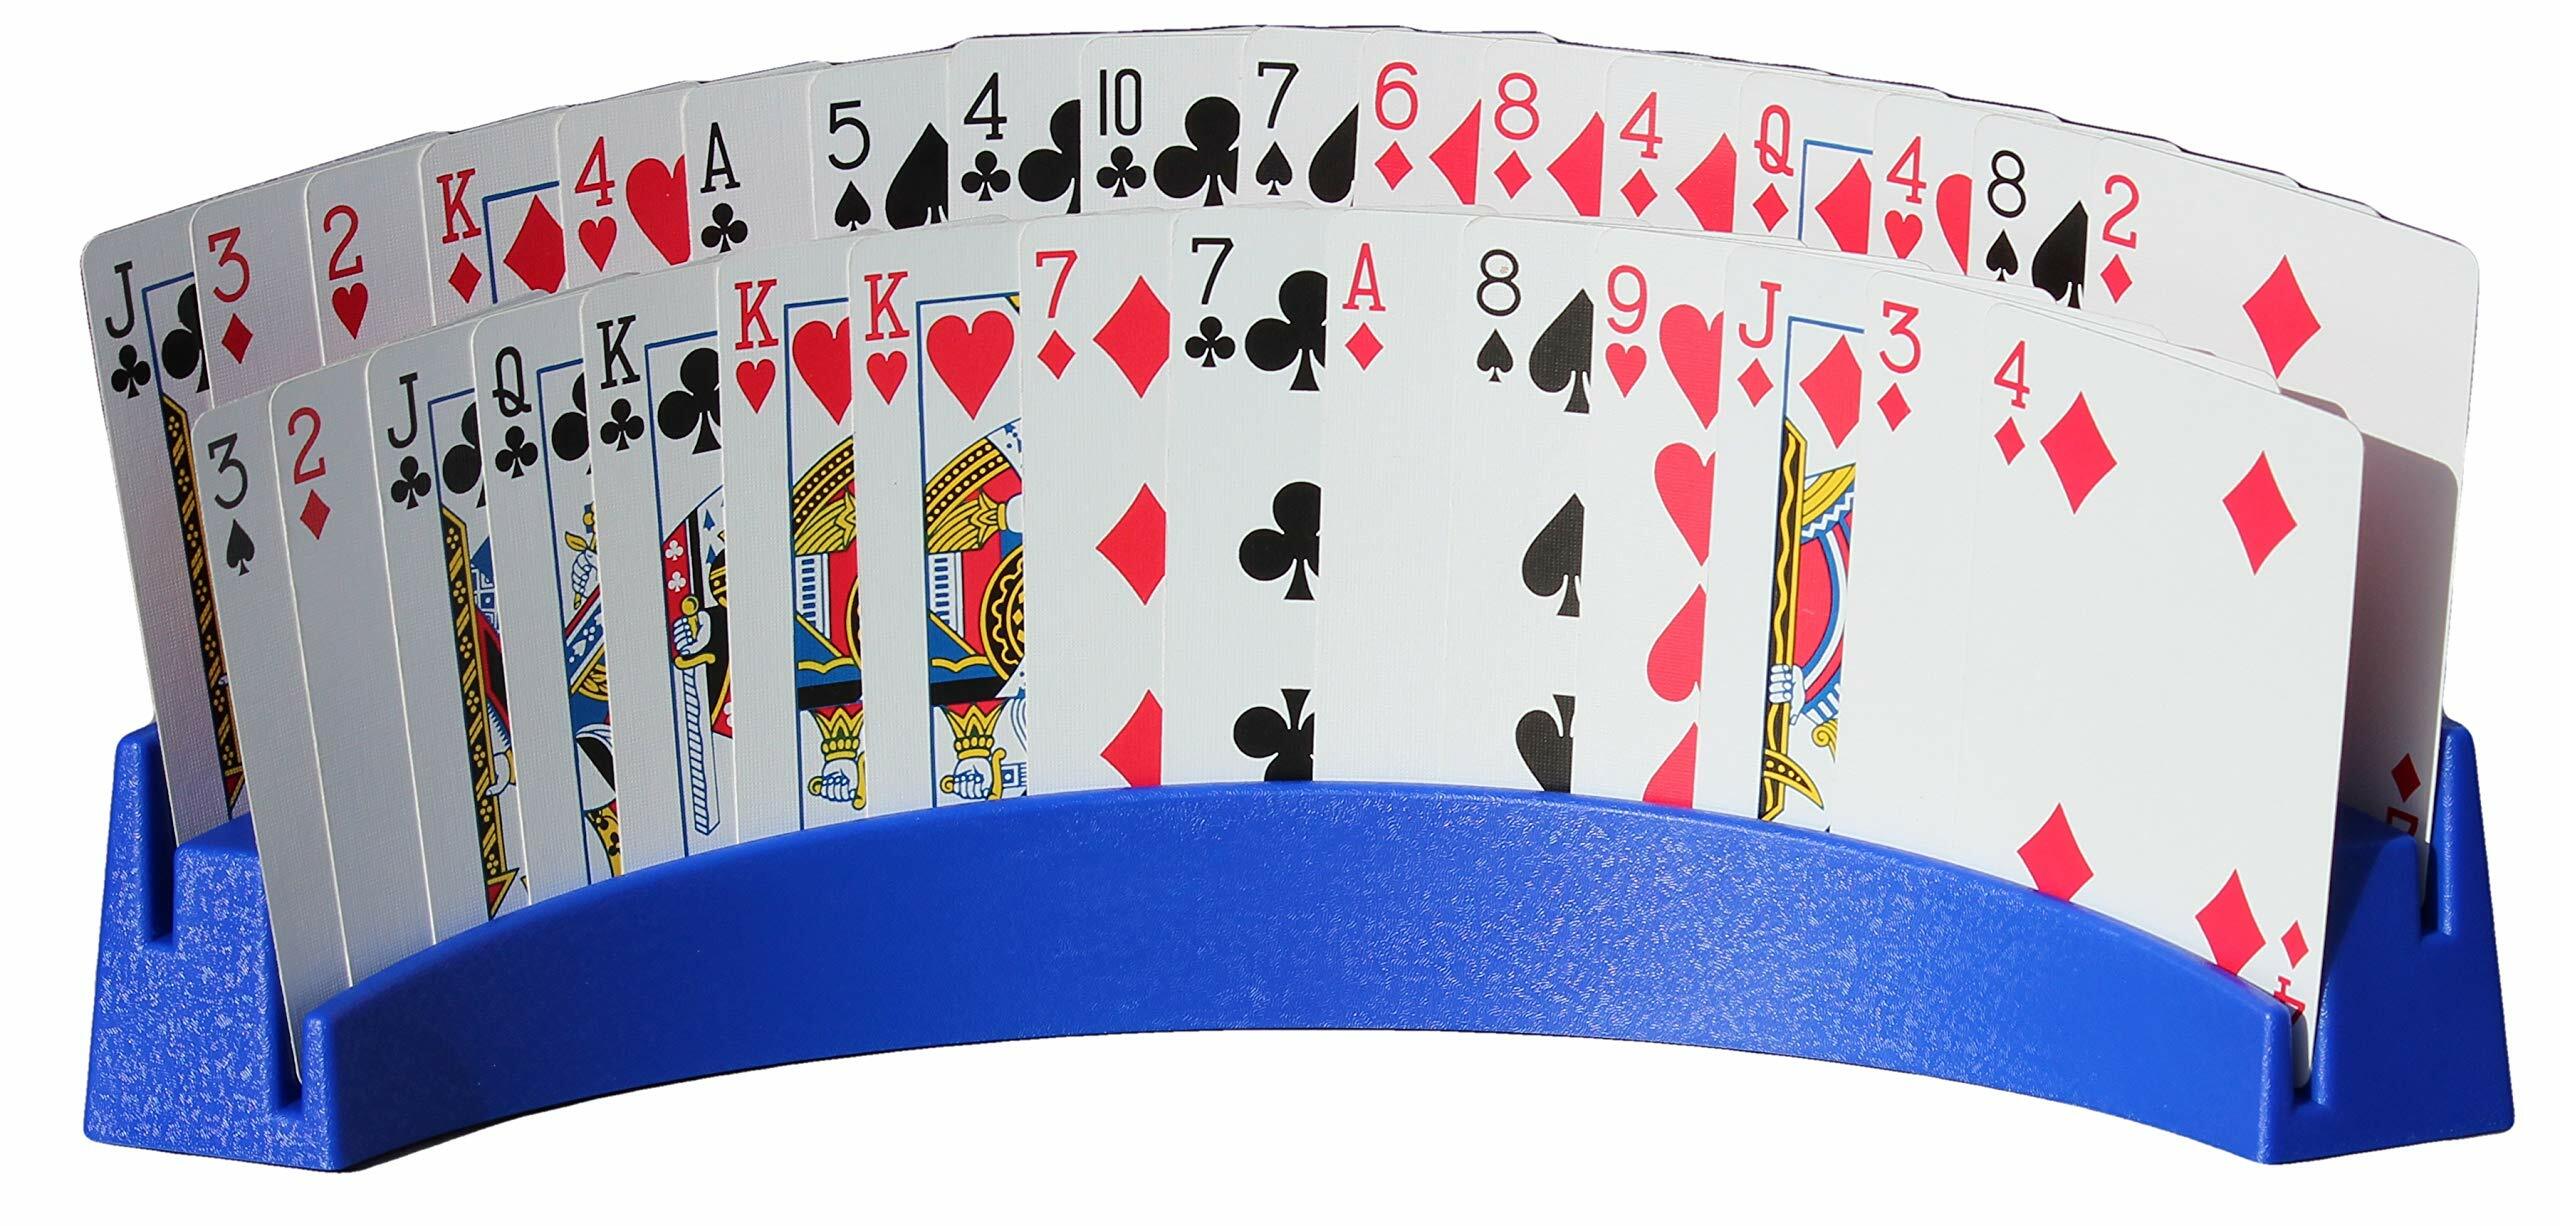 Twin Tier Premier Playing Card Holder 12 1/2 x 4 1/2 x 2 1/4 - Holds Up to 32 Playing Cards Easily Made in The USA Set of 2 Stack for Storage 